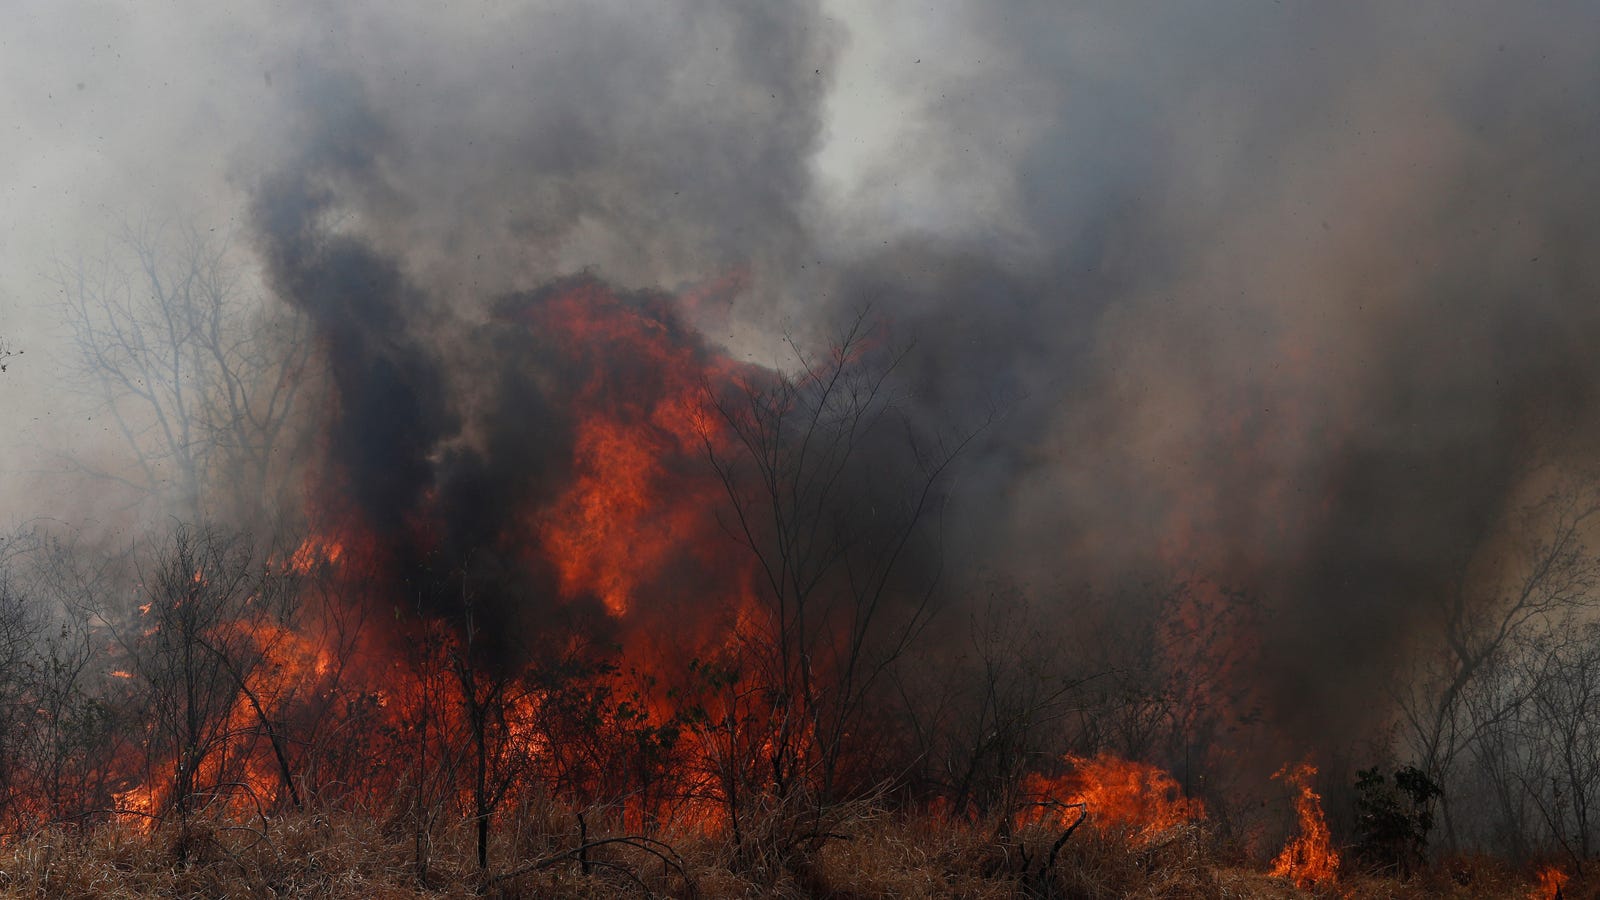 Bolivia's Forest Fires Have Left More Than 2 Million Animals Dead